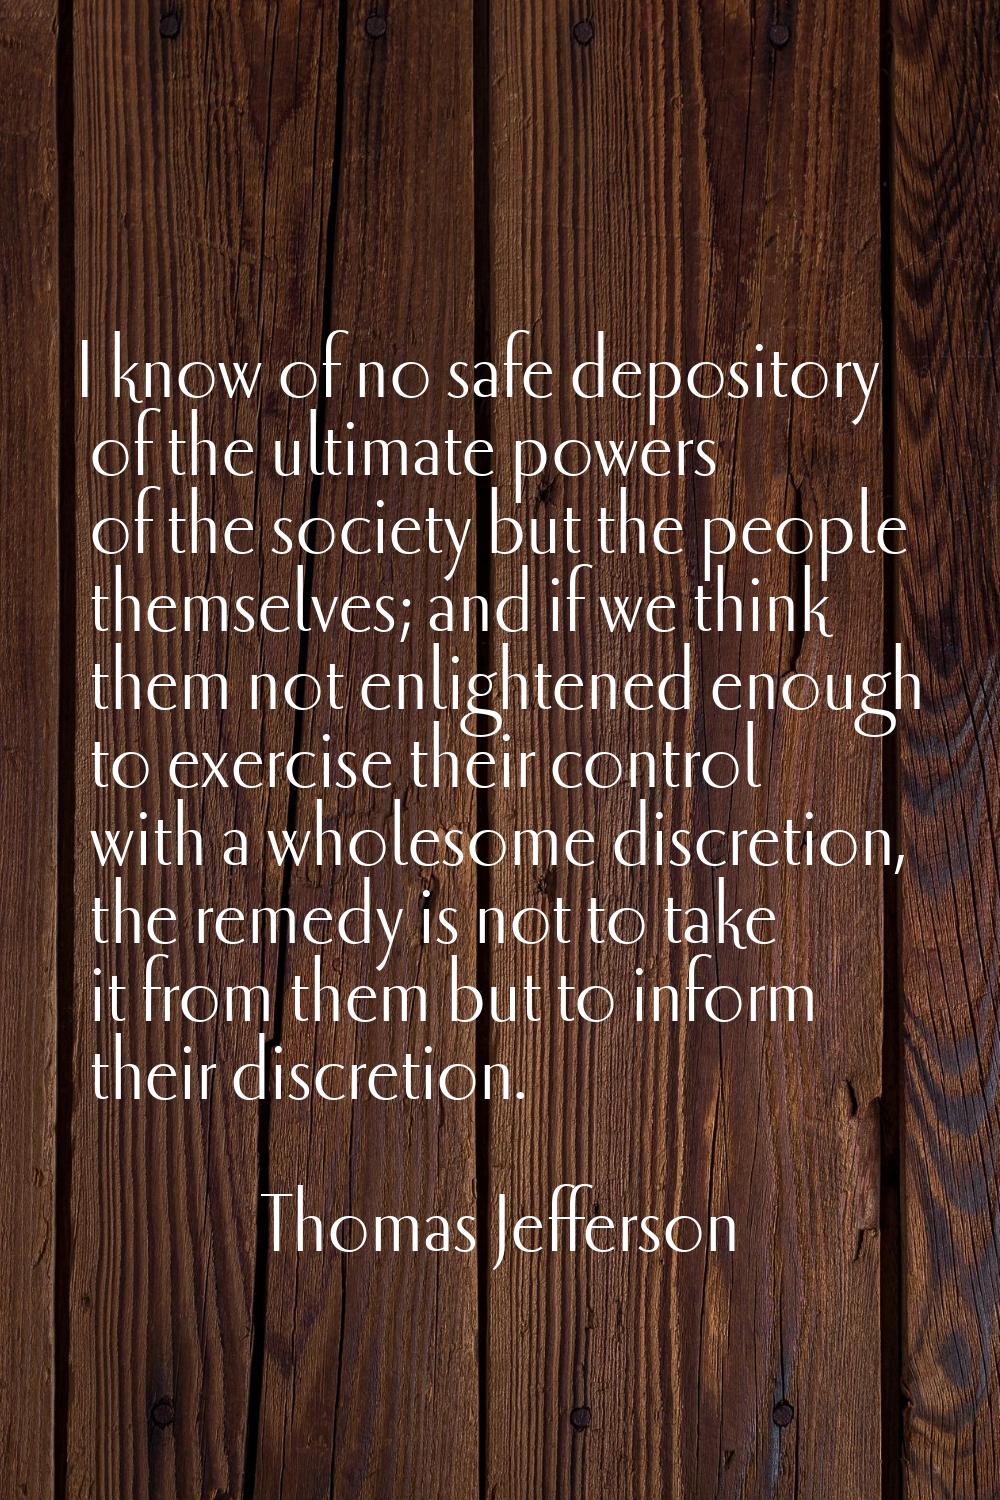 I know of no safe depository of the ultimate powers of the society but the people themselves; and i